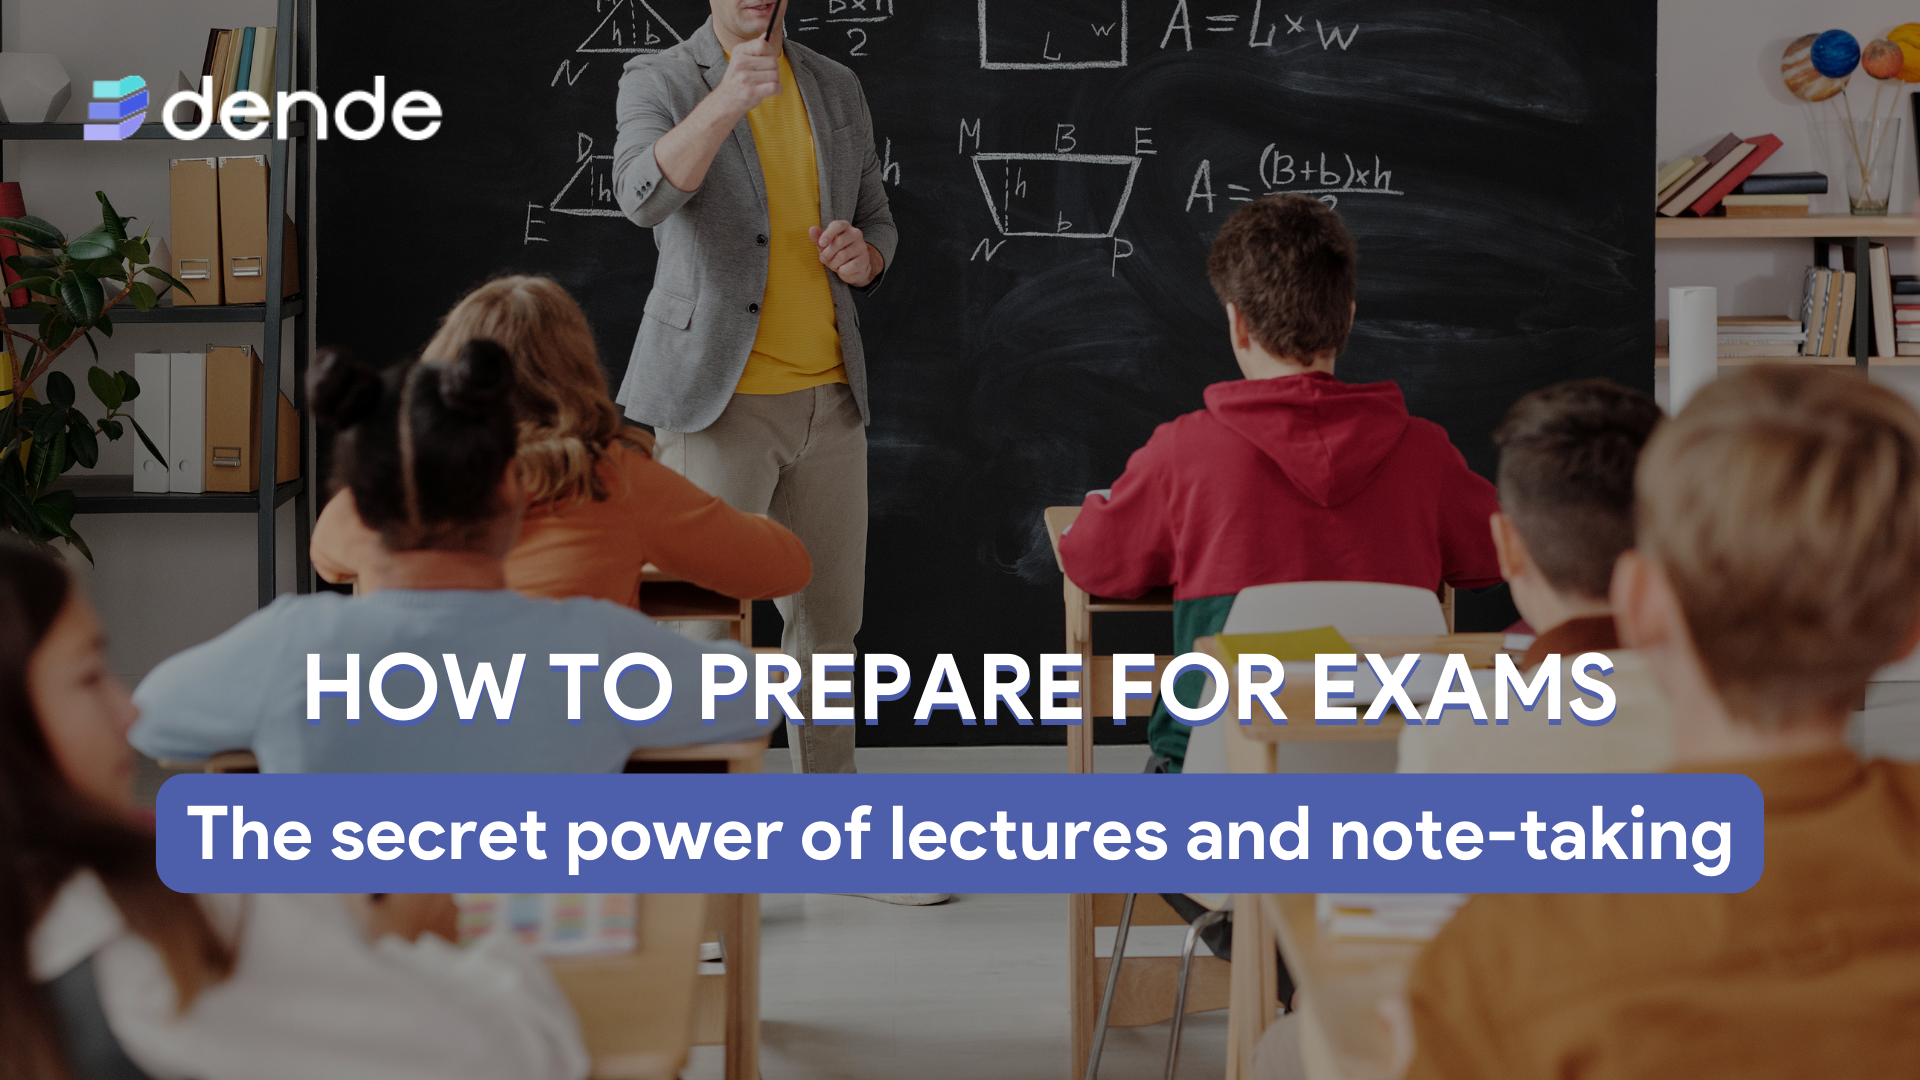 How to prepare for exams: the secret power of lectures and note-taking